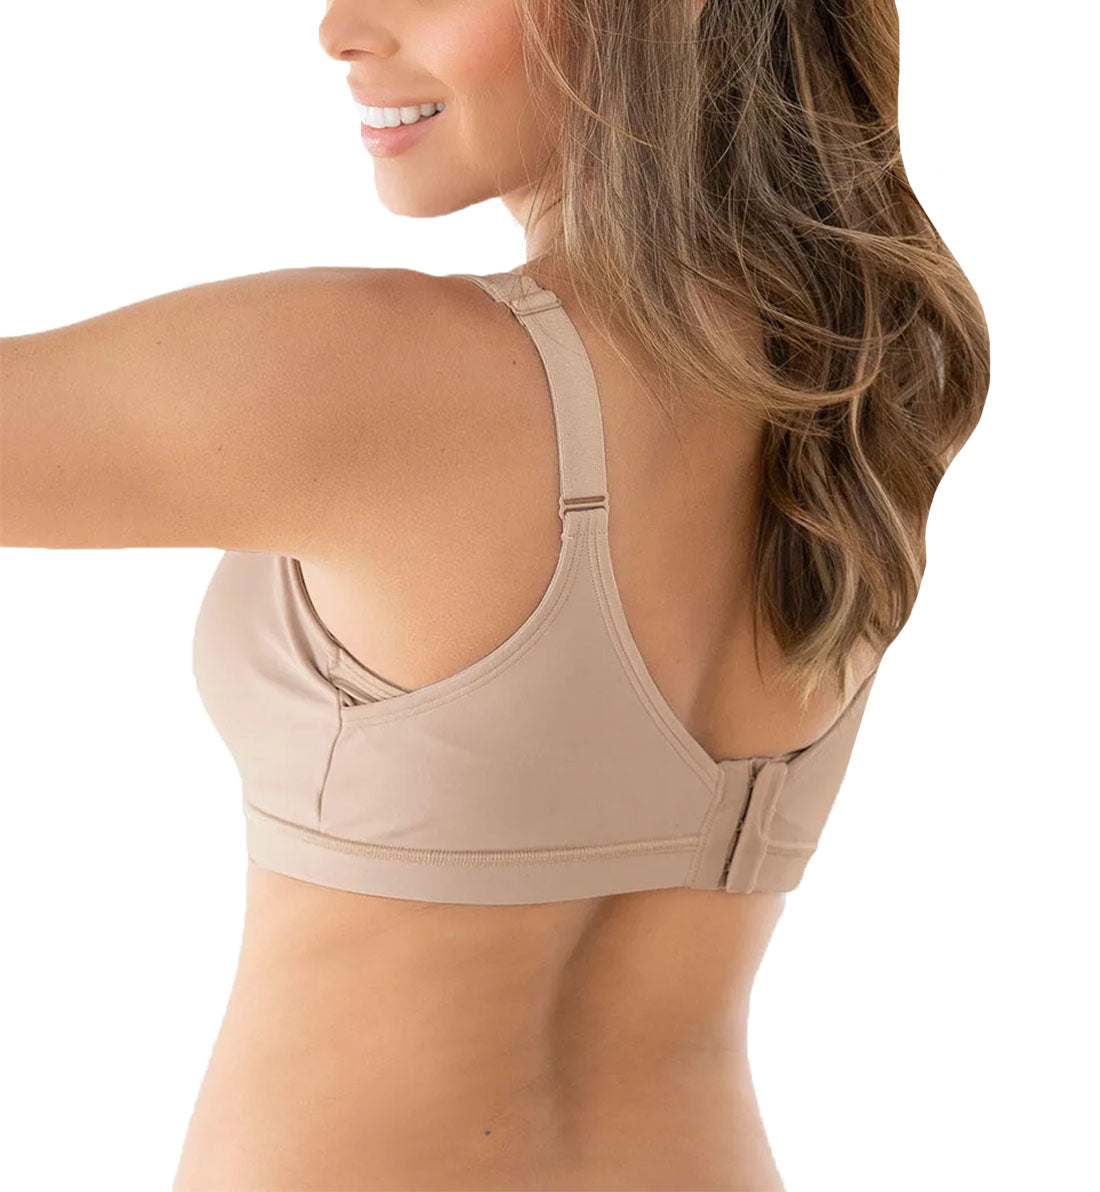 Leonisa Back-Smoothing Minimizer Nonwire Bra (091022)- Nude - Breakout Bras